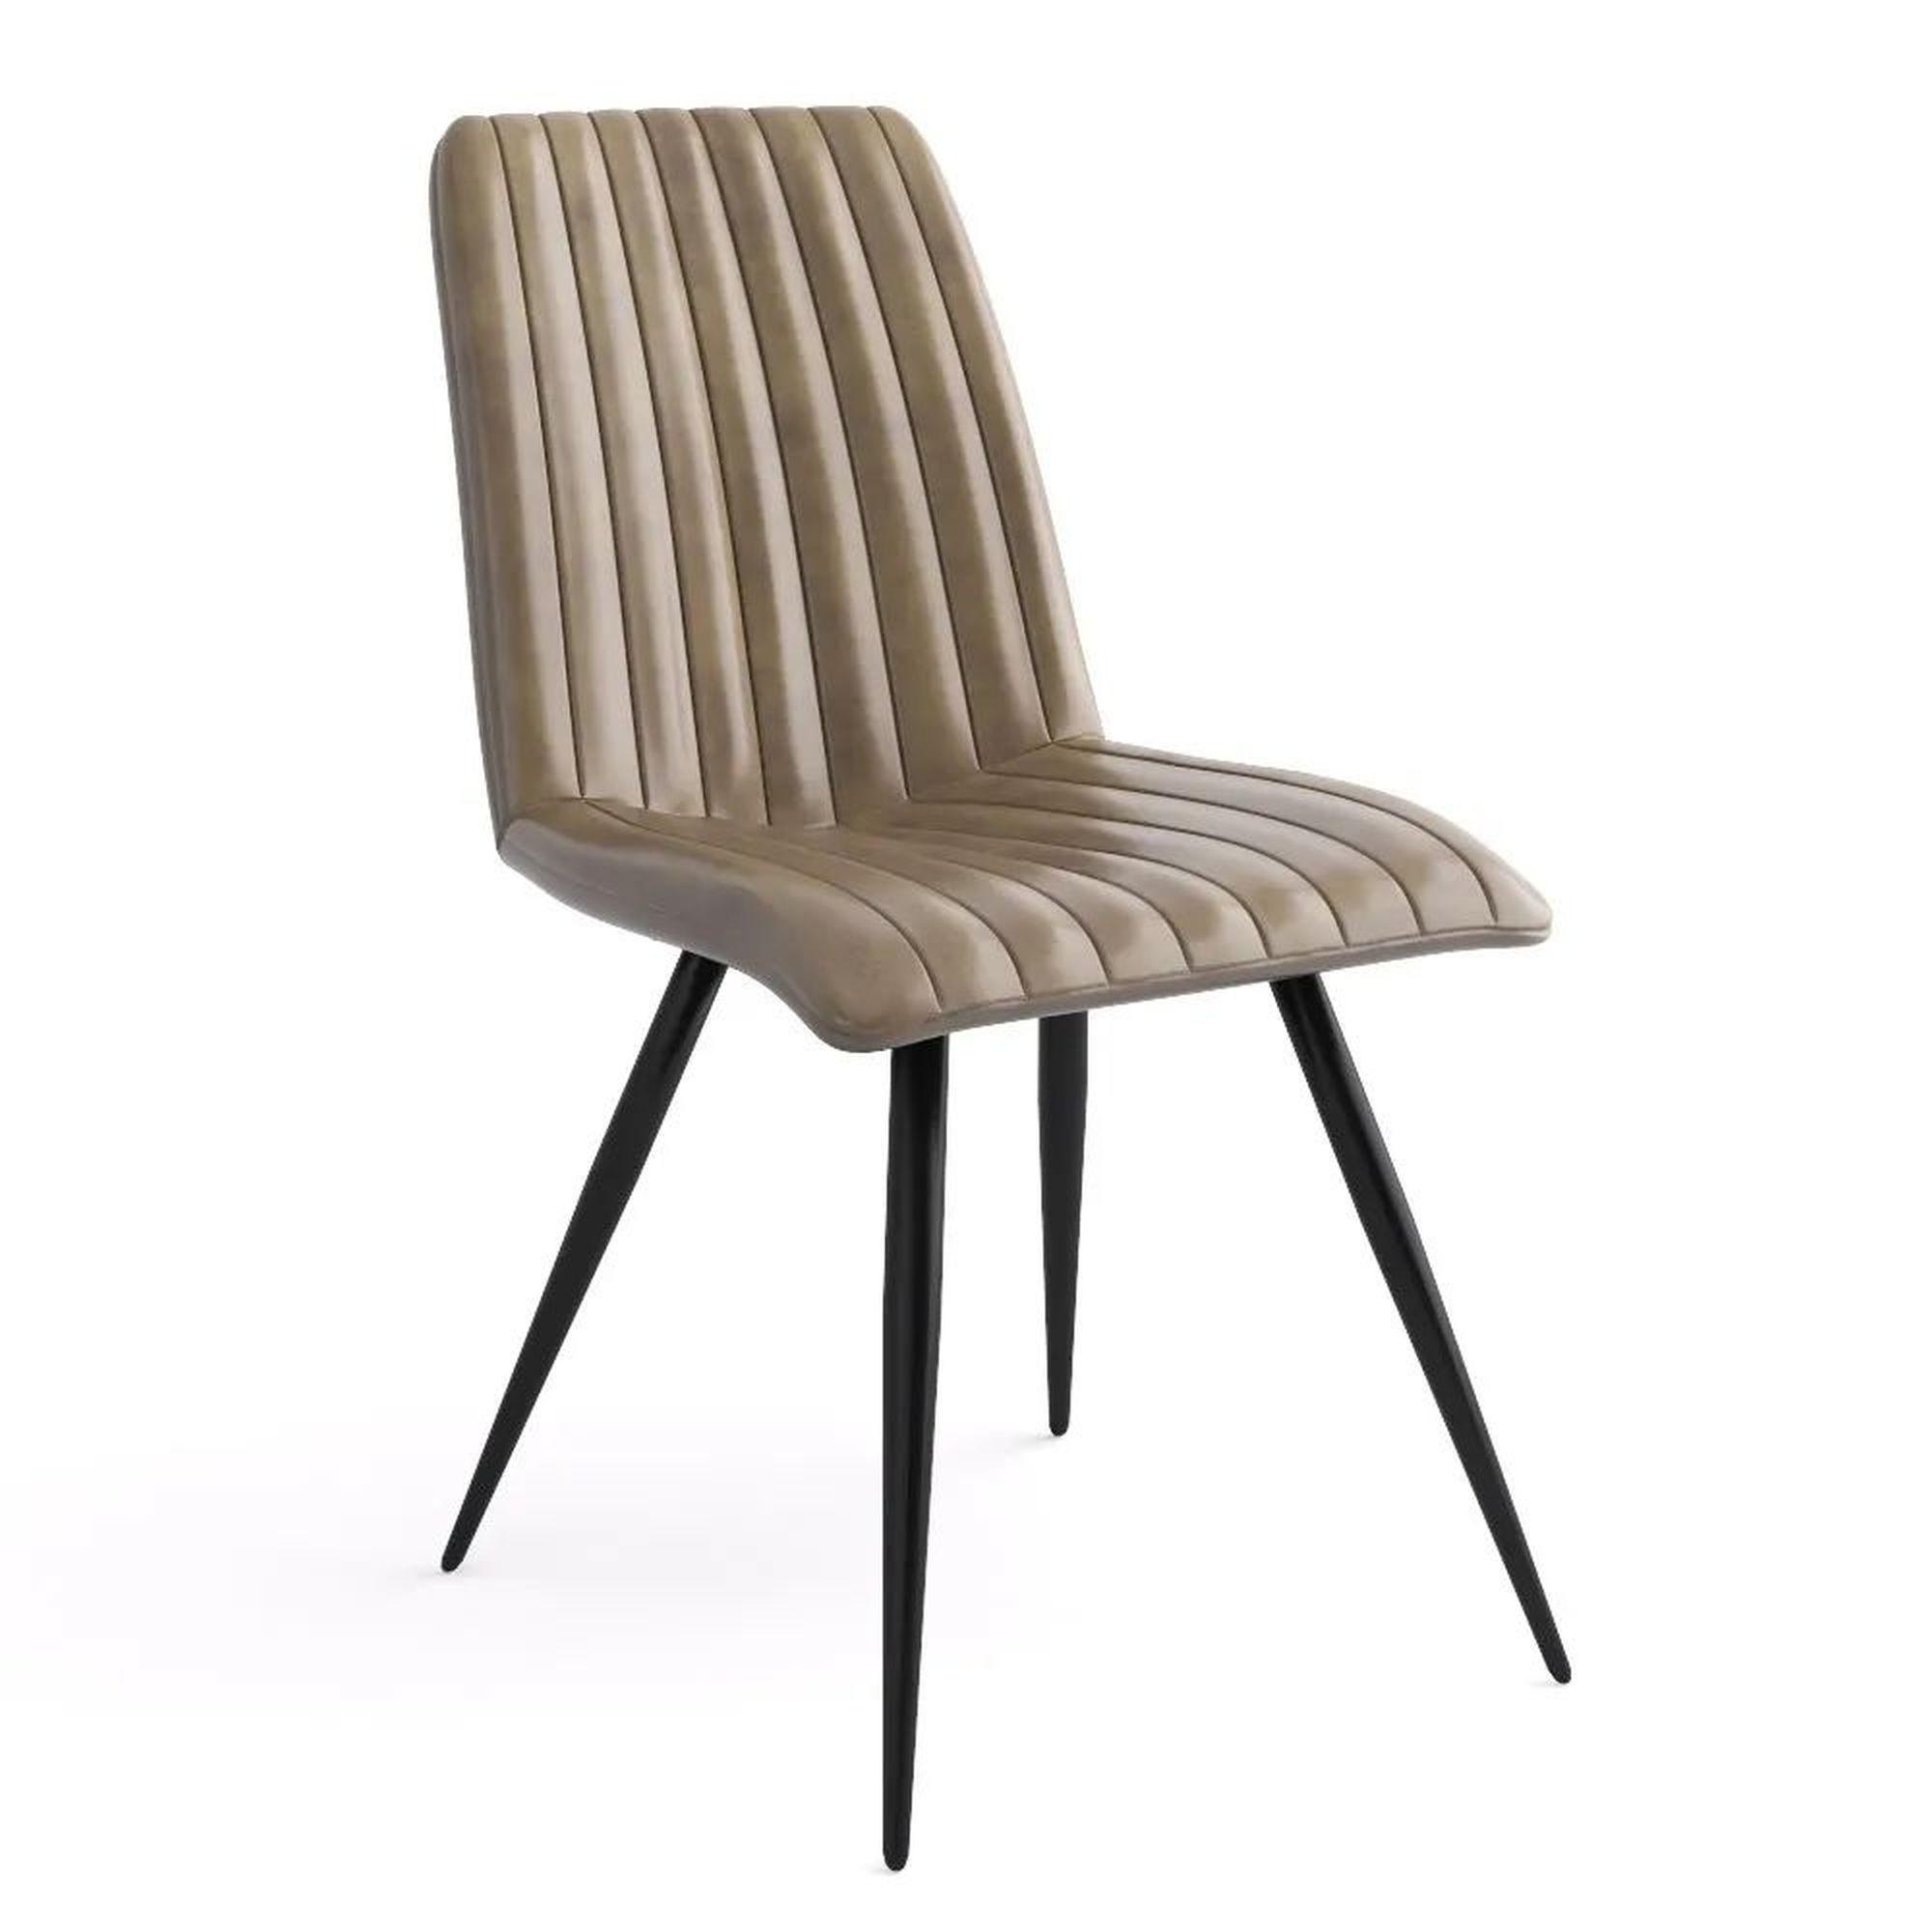 Margo Dark Brown Dining Chair, Genuine Leather with Metal Legs (Sold in Pairs)